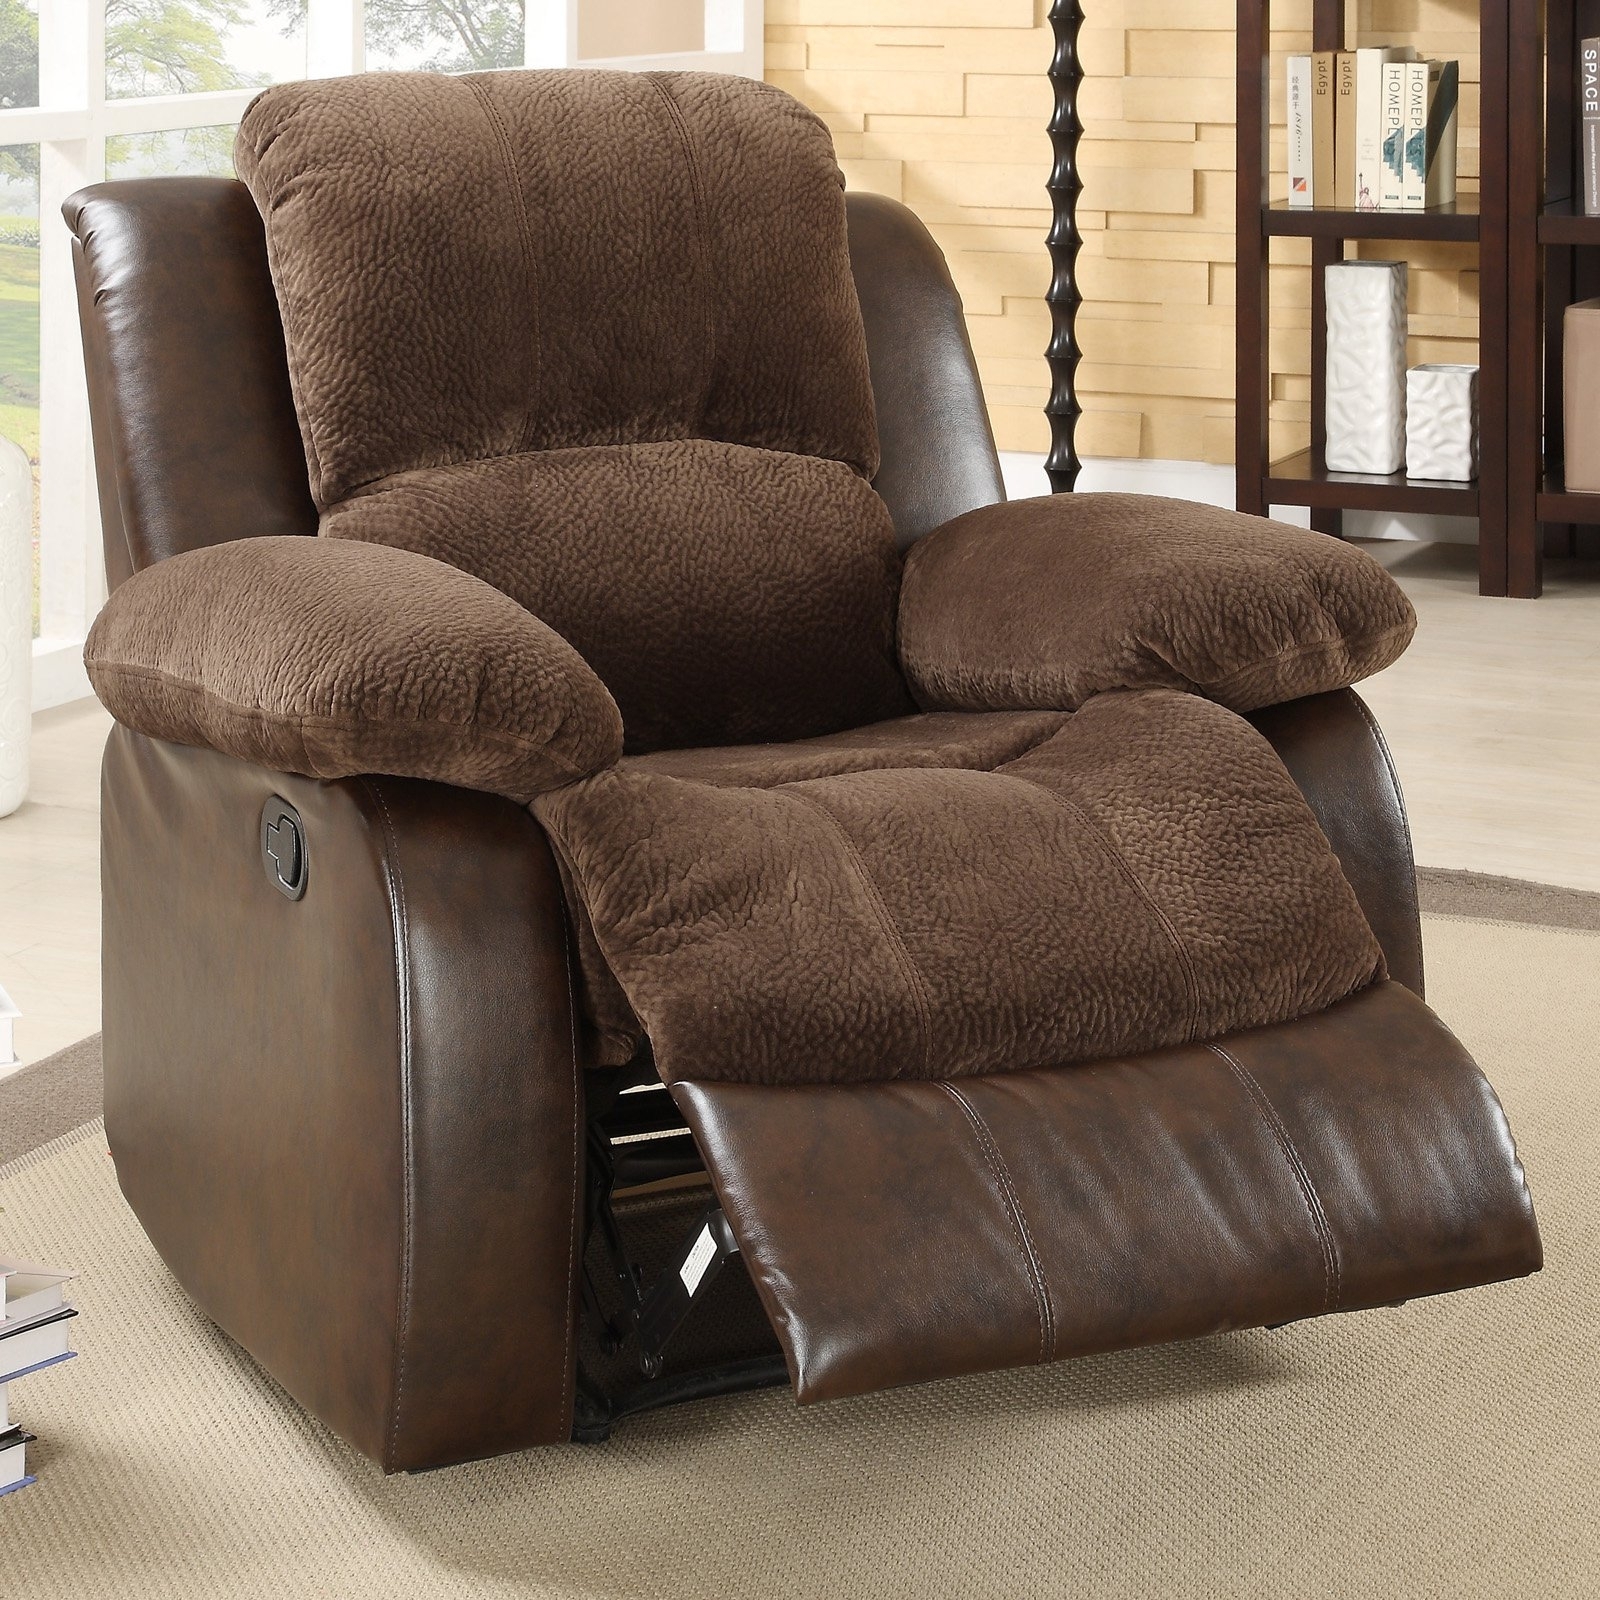 Used Recliners 